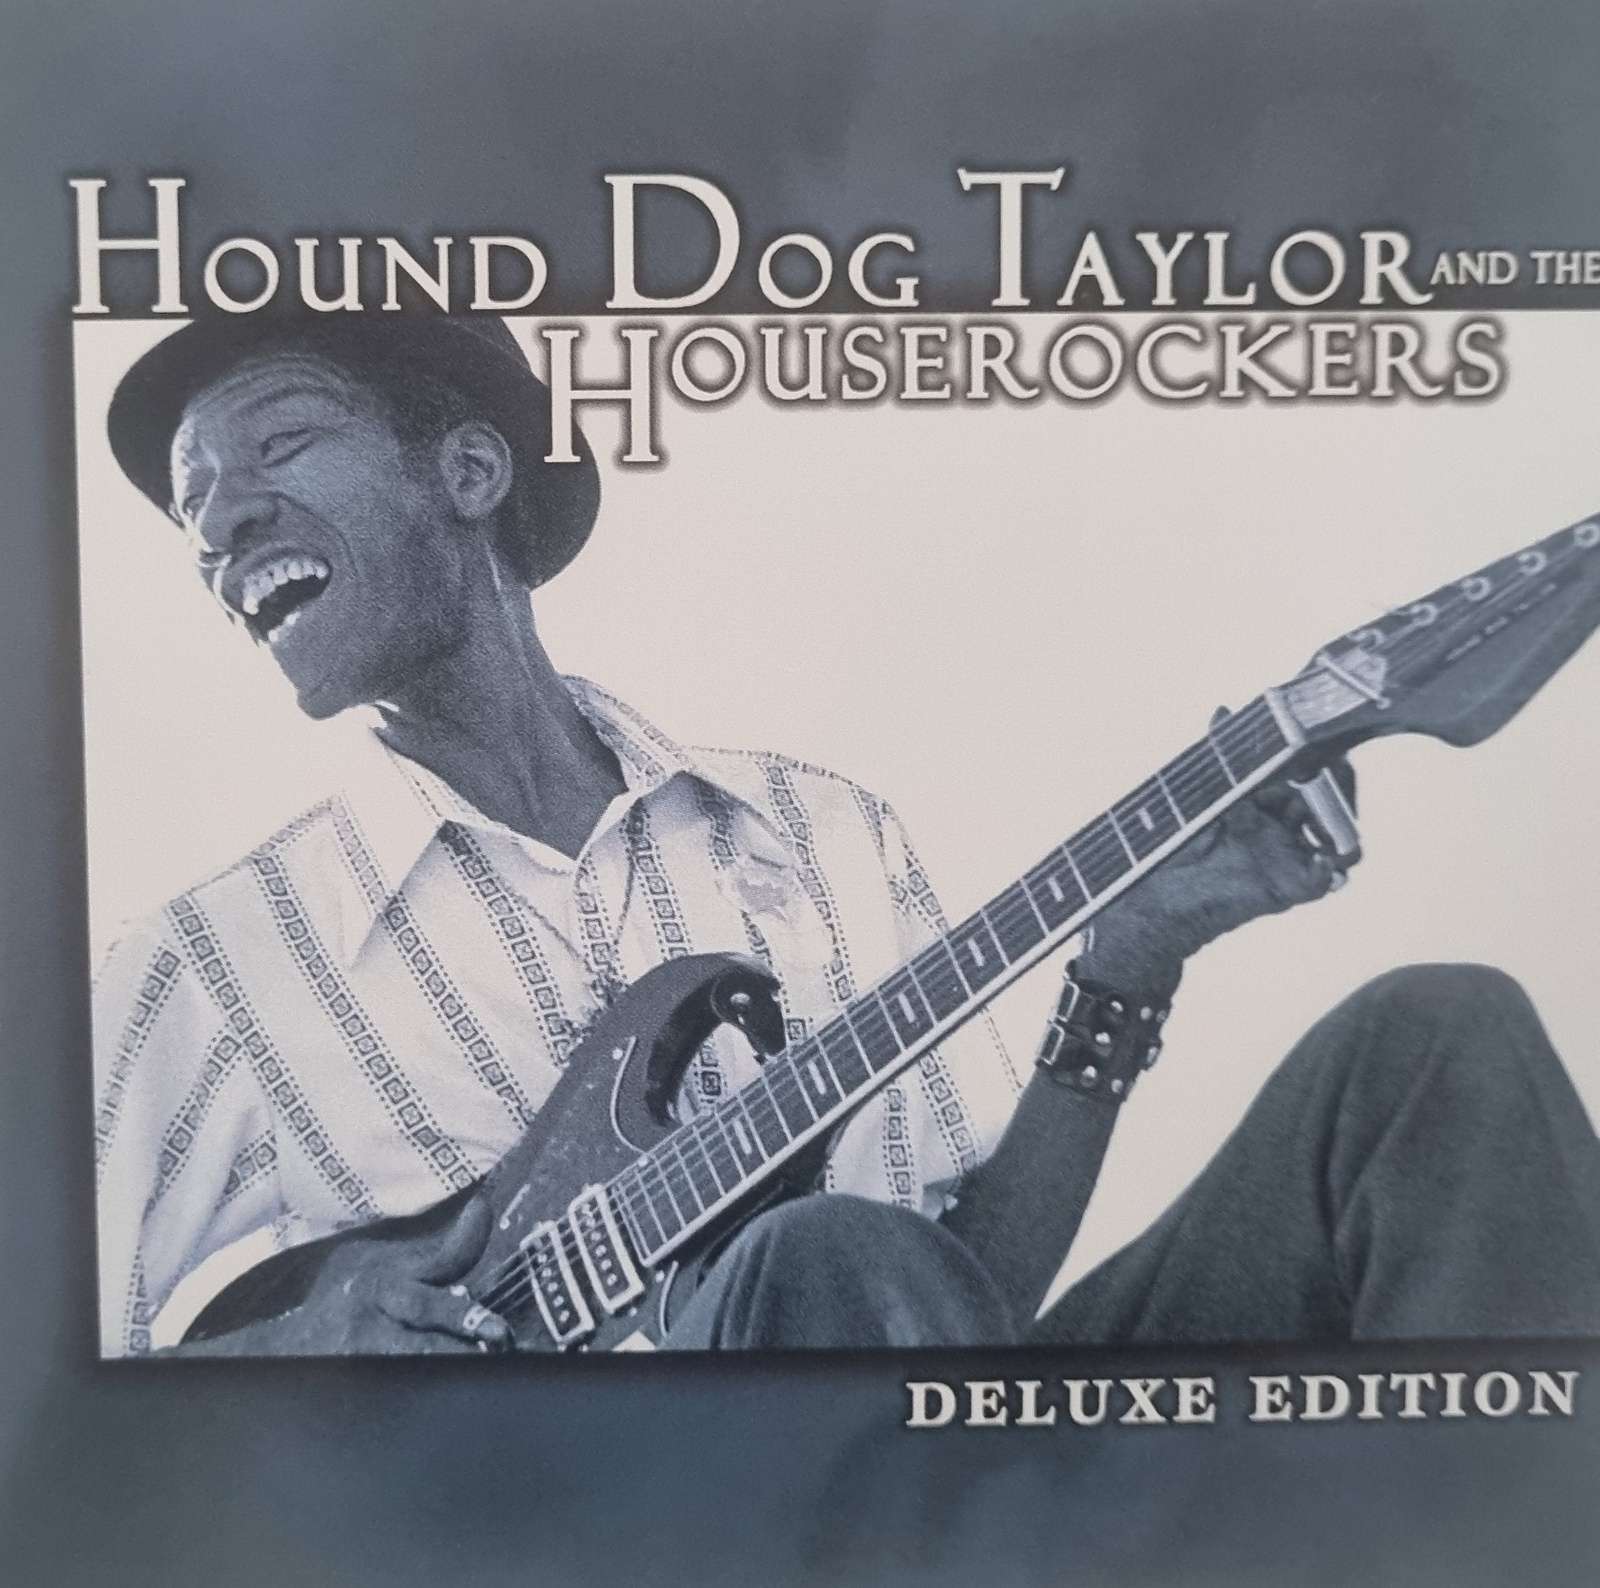 Hound Dog Taylor and the Houserockers - Deluxe Edition (CD)